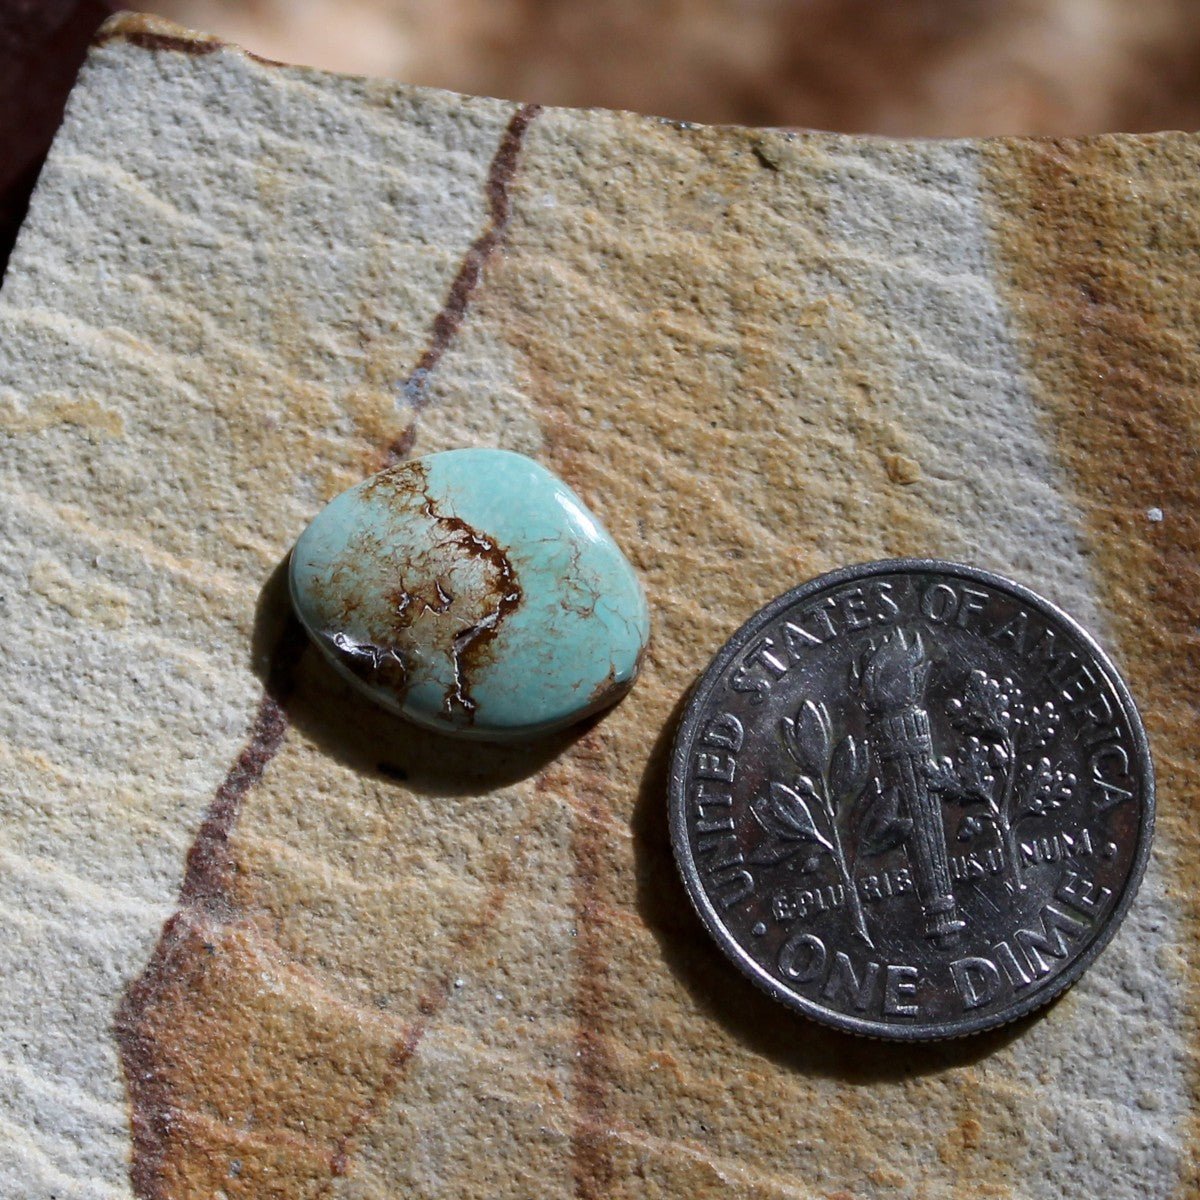 3.3 carat light blue Stone Mountain Turquoise cabochon with red matrix